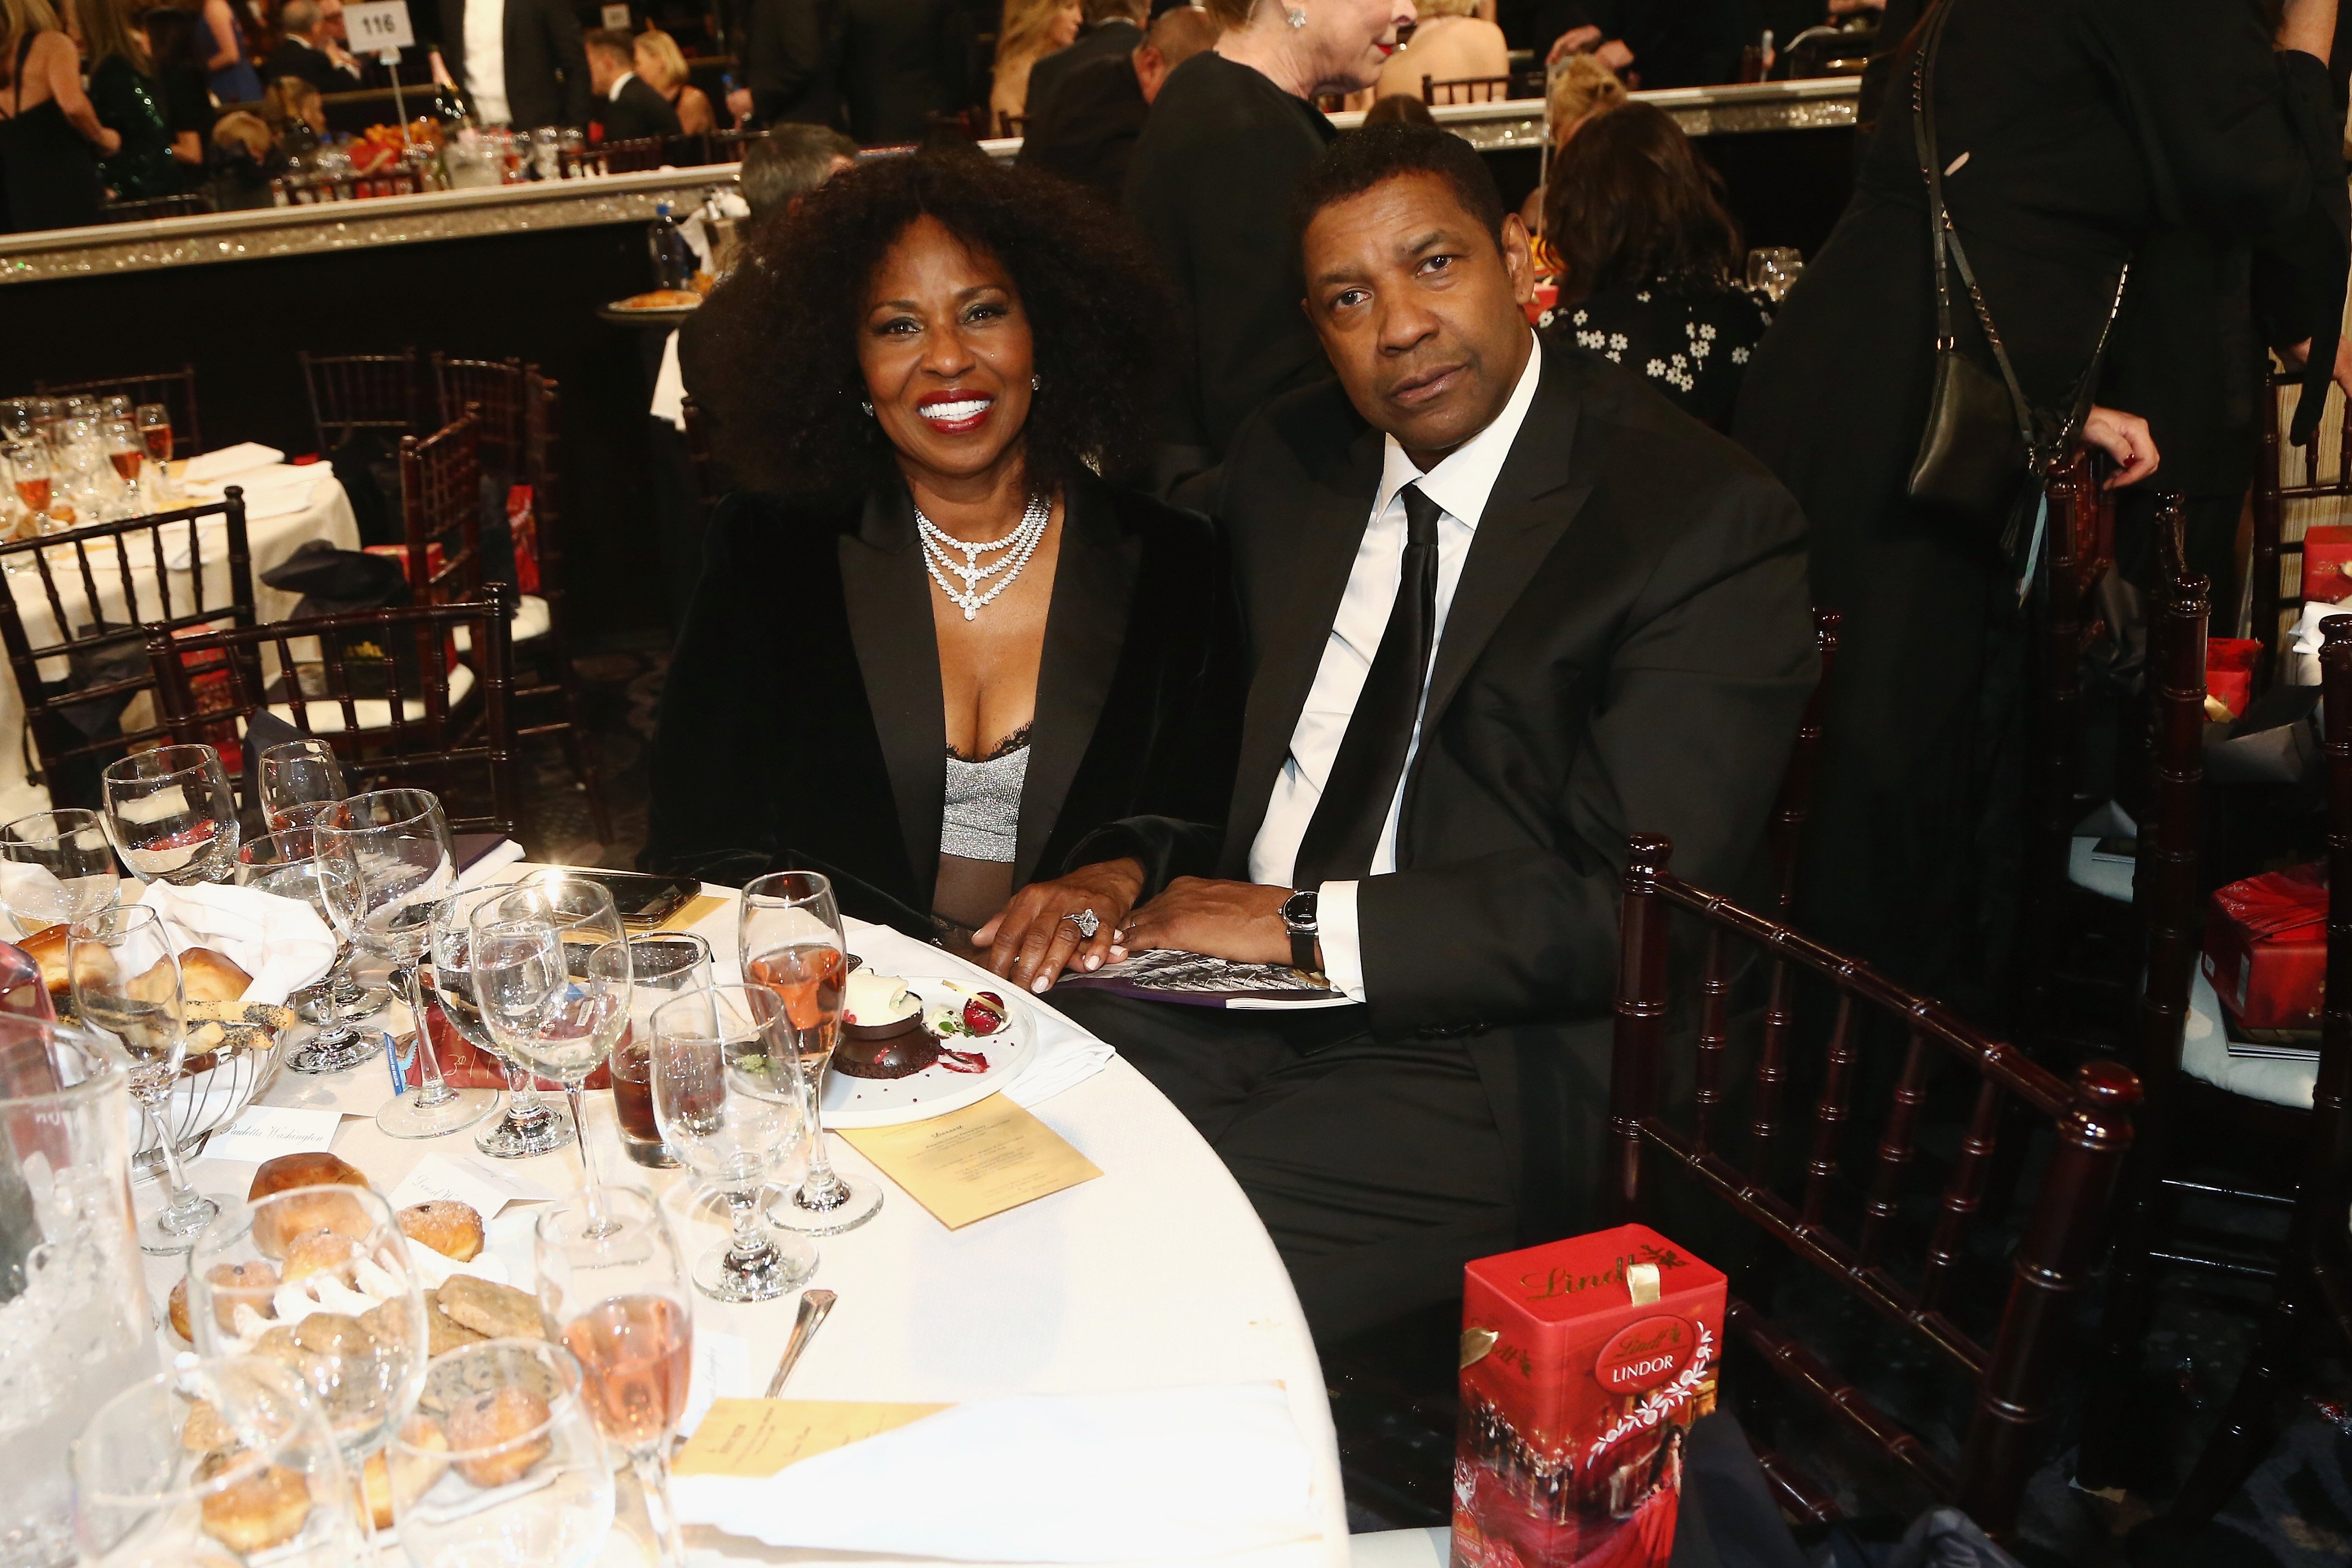 Denzel Washington and Pauletta Washington attend the Golden Globe Awards sponsored by Lindt Chocolate on January 6, 2019 |  Source: Getty Images